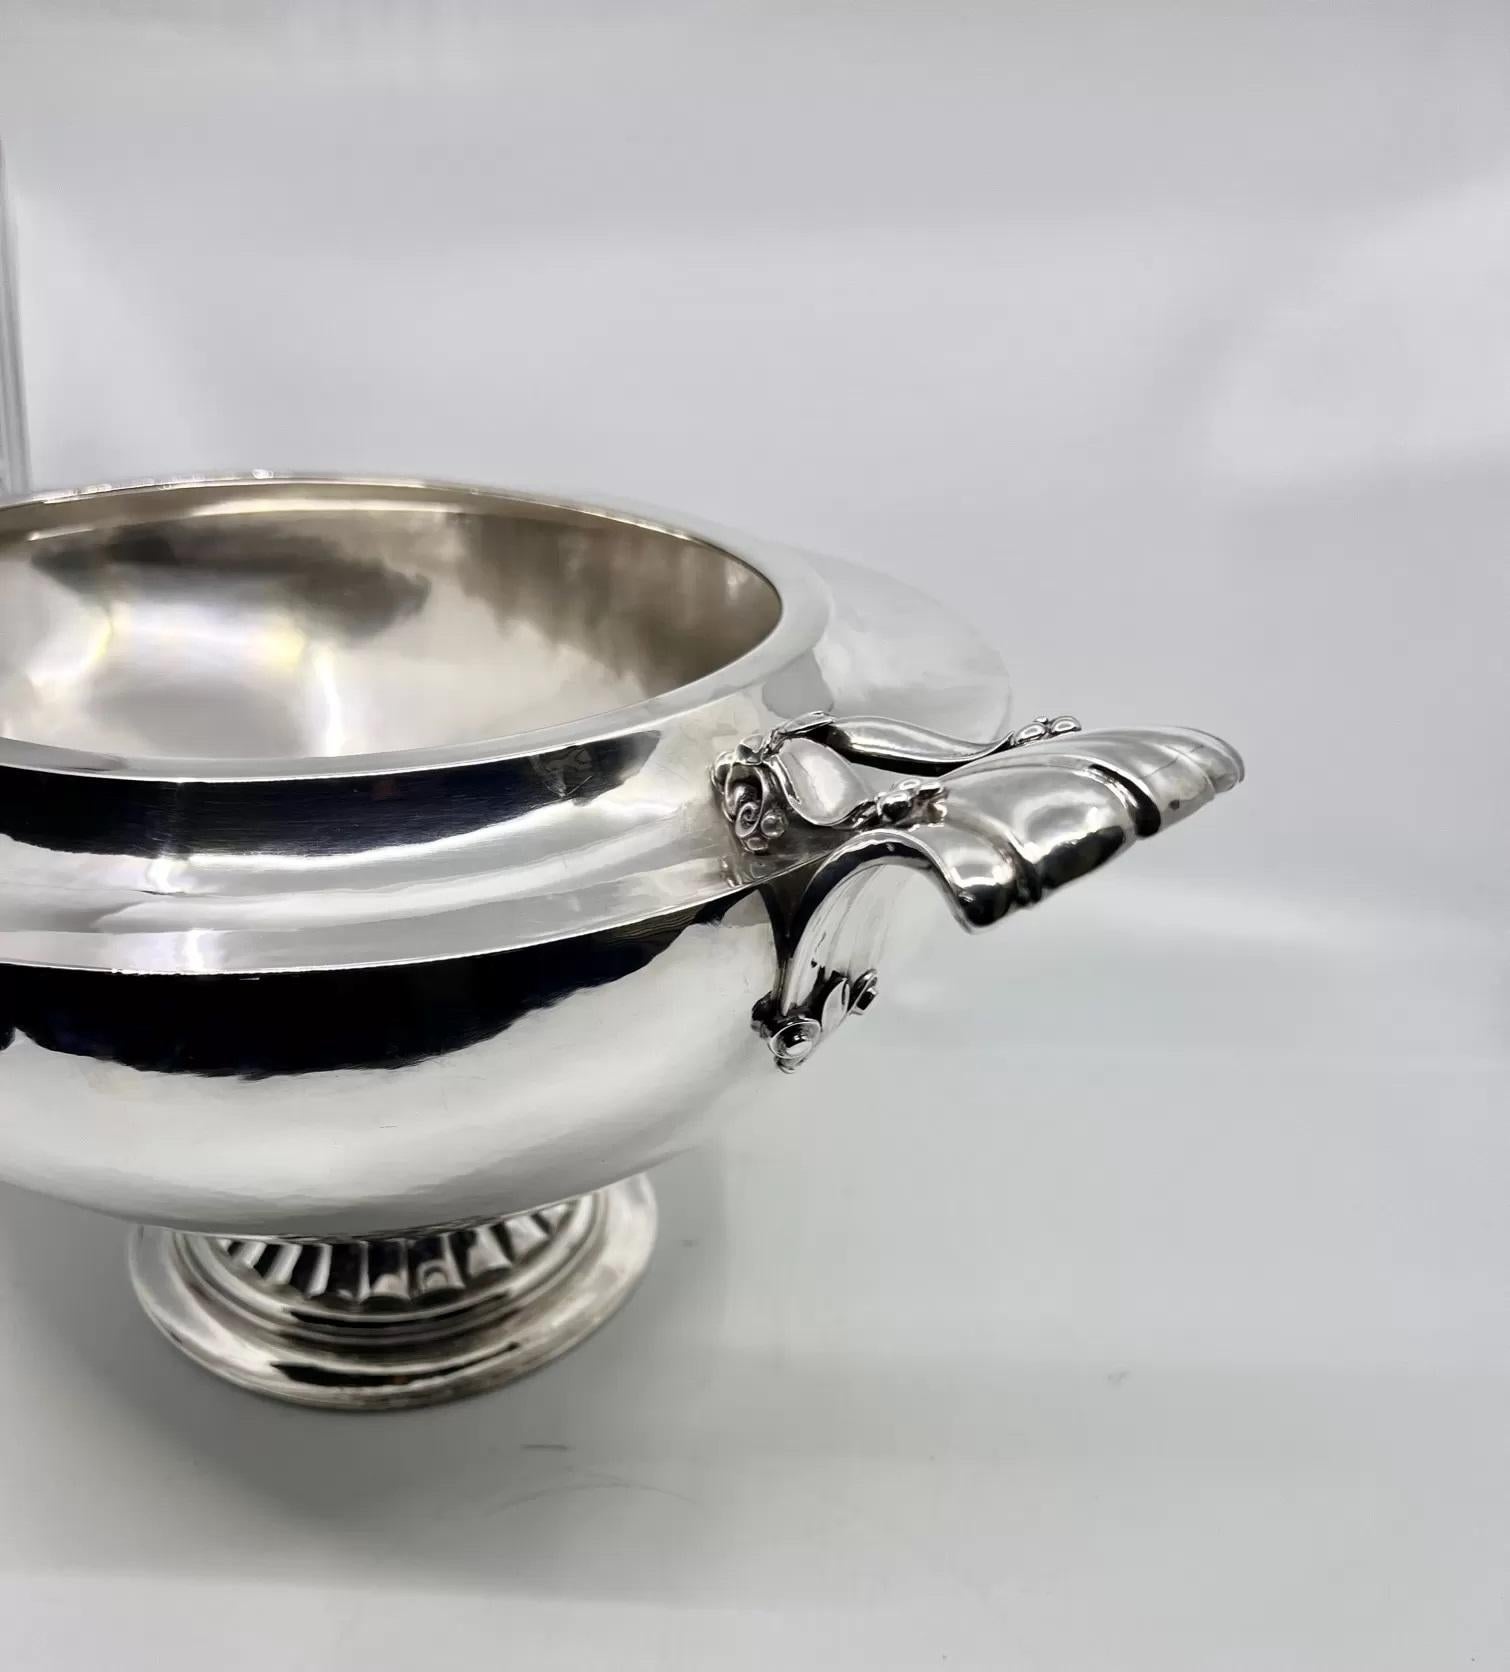 Georg Jensen Sterling Silver Monumental Tureen #573 In Excellent Condition For Sale In Hellerup, DK